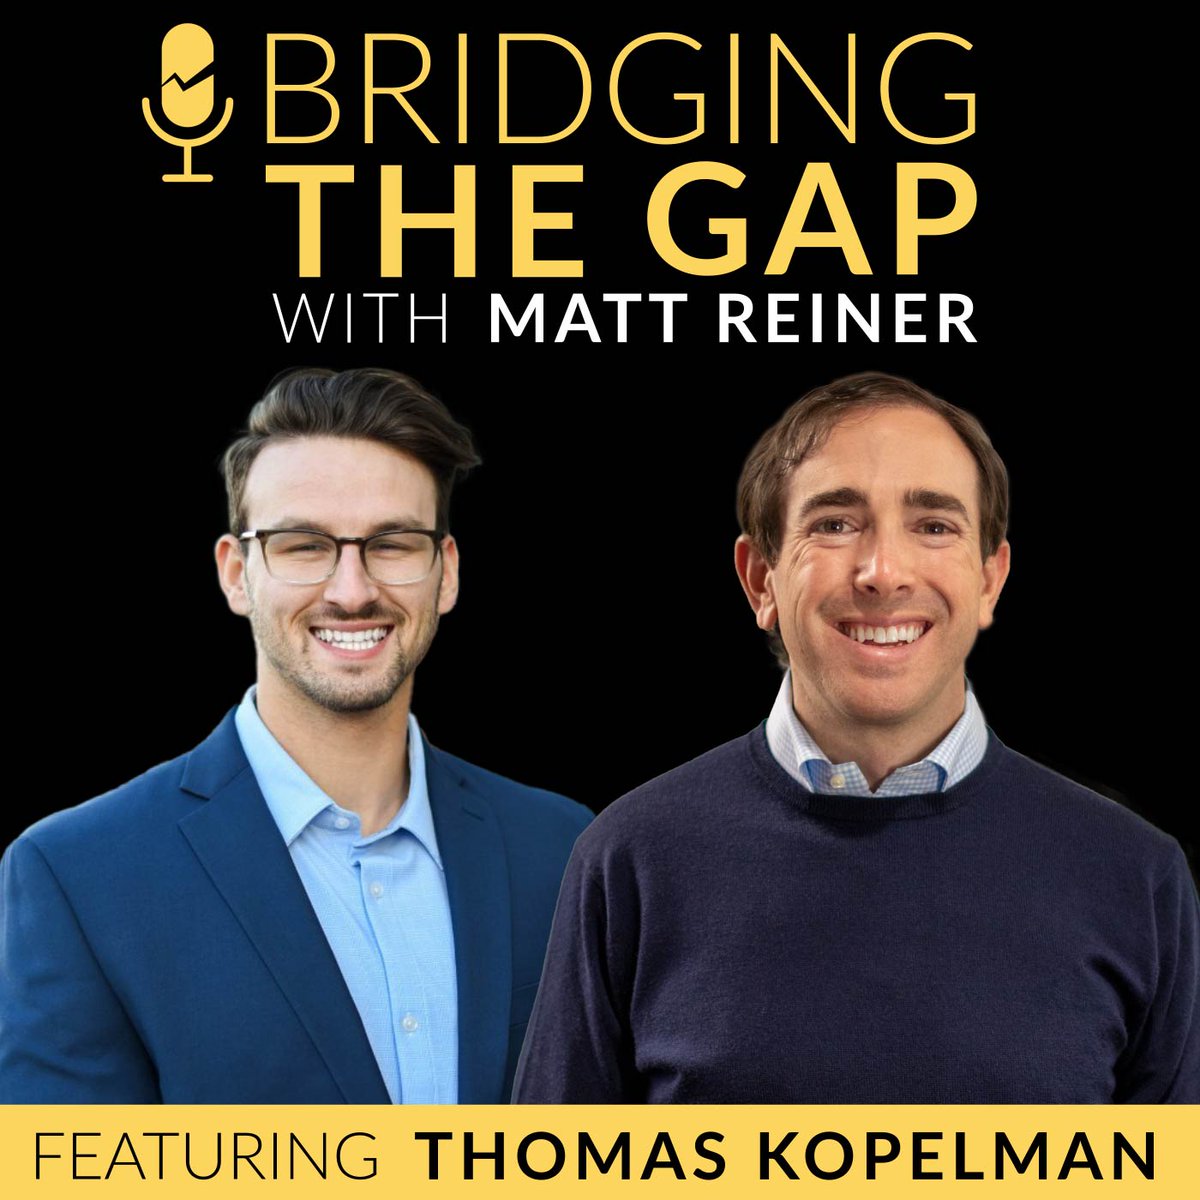 Thomas Kopelman @TKopelman, Co-Founder of @AllStWealth, blogger, podcast host, and entrepreneur, joins me on this episode of #BridgingTheGap. Thomas shares his journey of attracting clients, discovering his niche, tools and resources he uses, and more. bit.ly/3p7mS6m